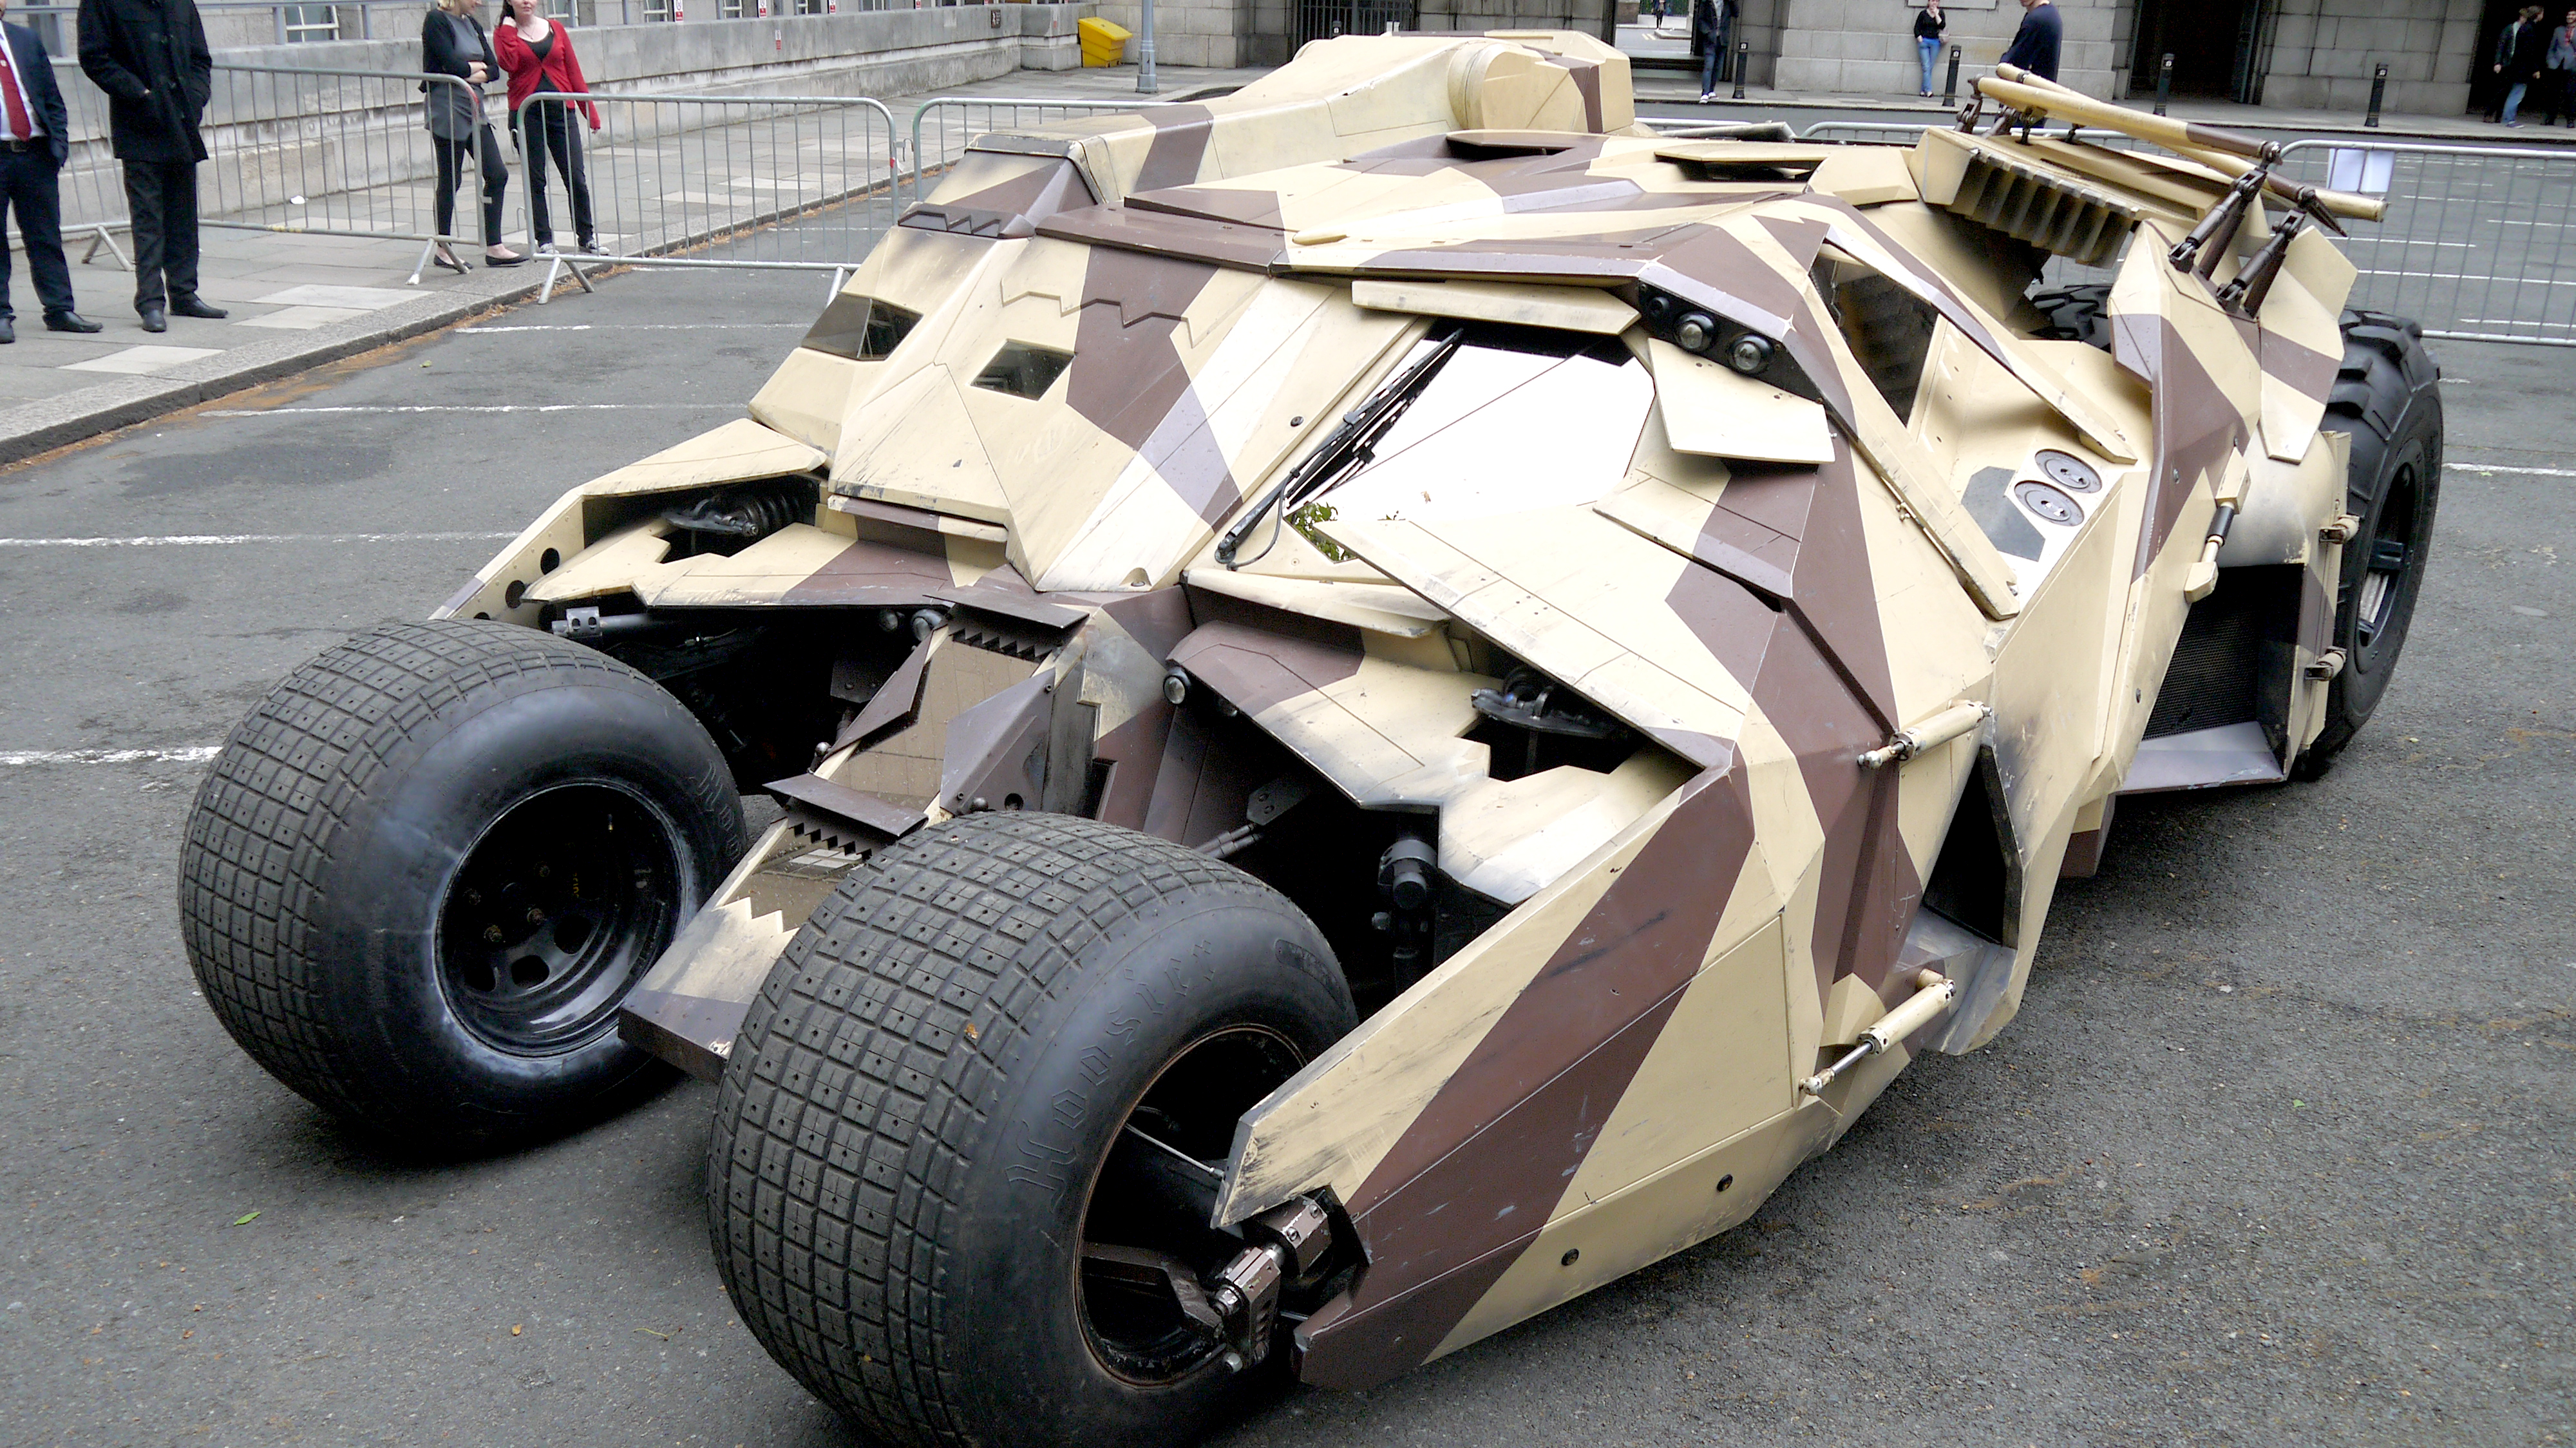 The technology of the Tumbler - how Britain made the Dark Knight mobile |  TechRadar